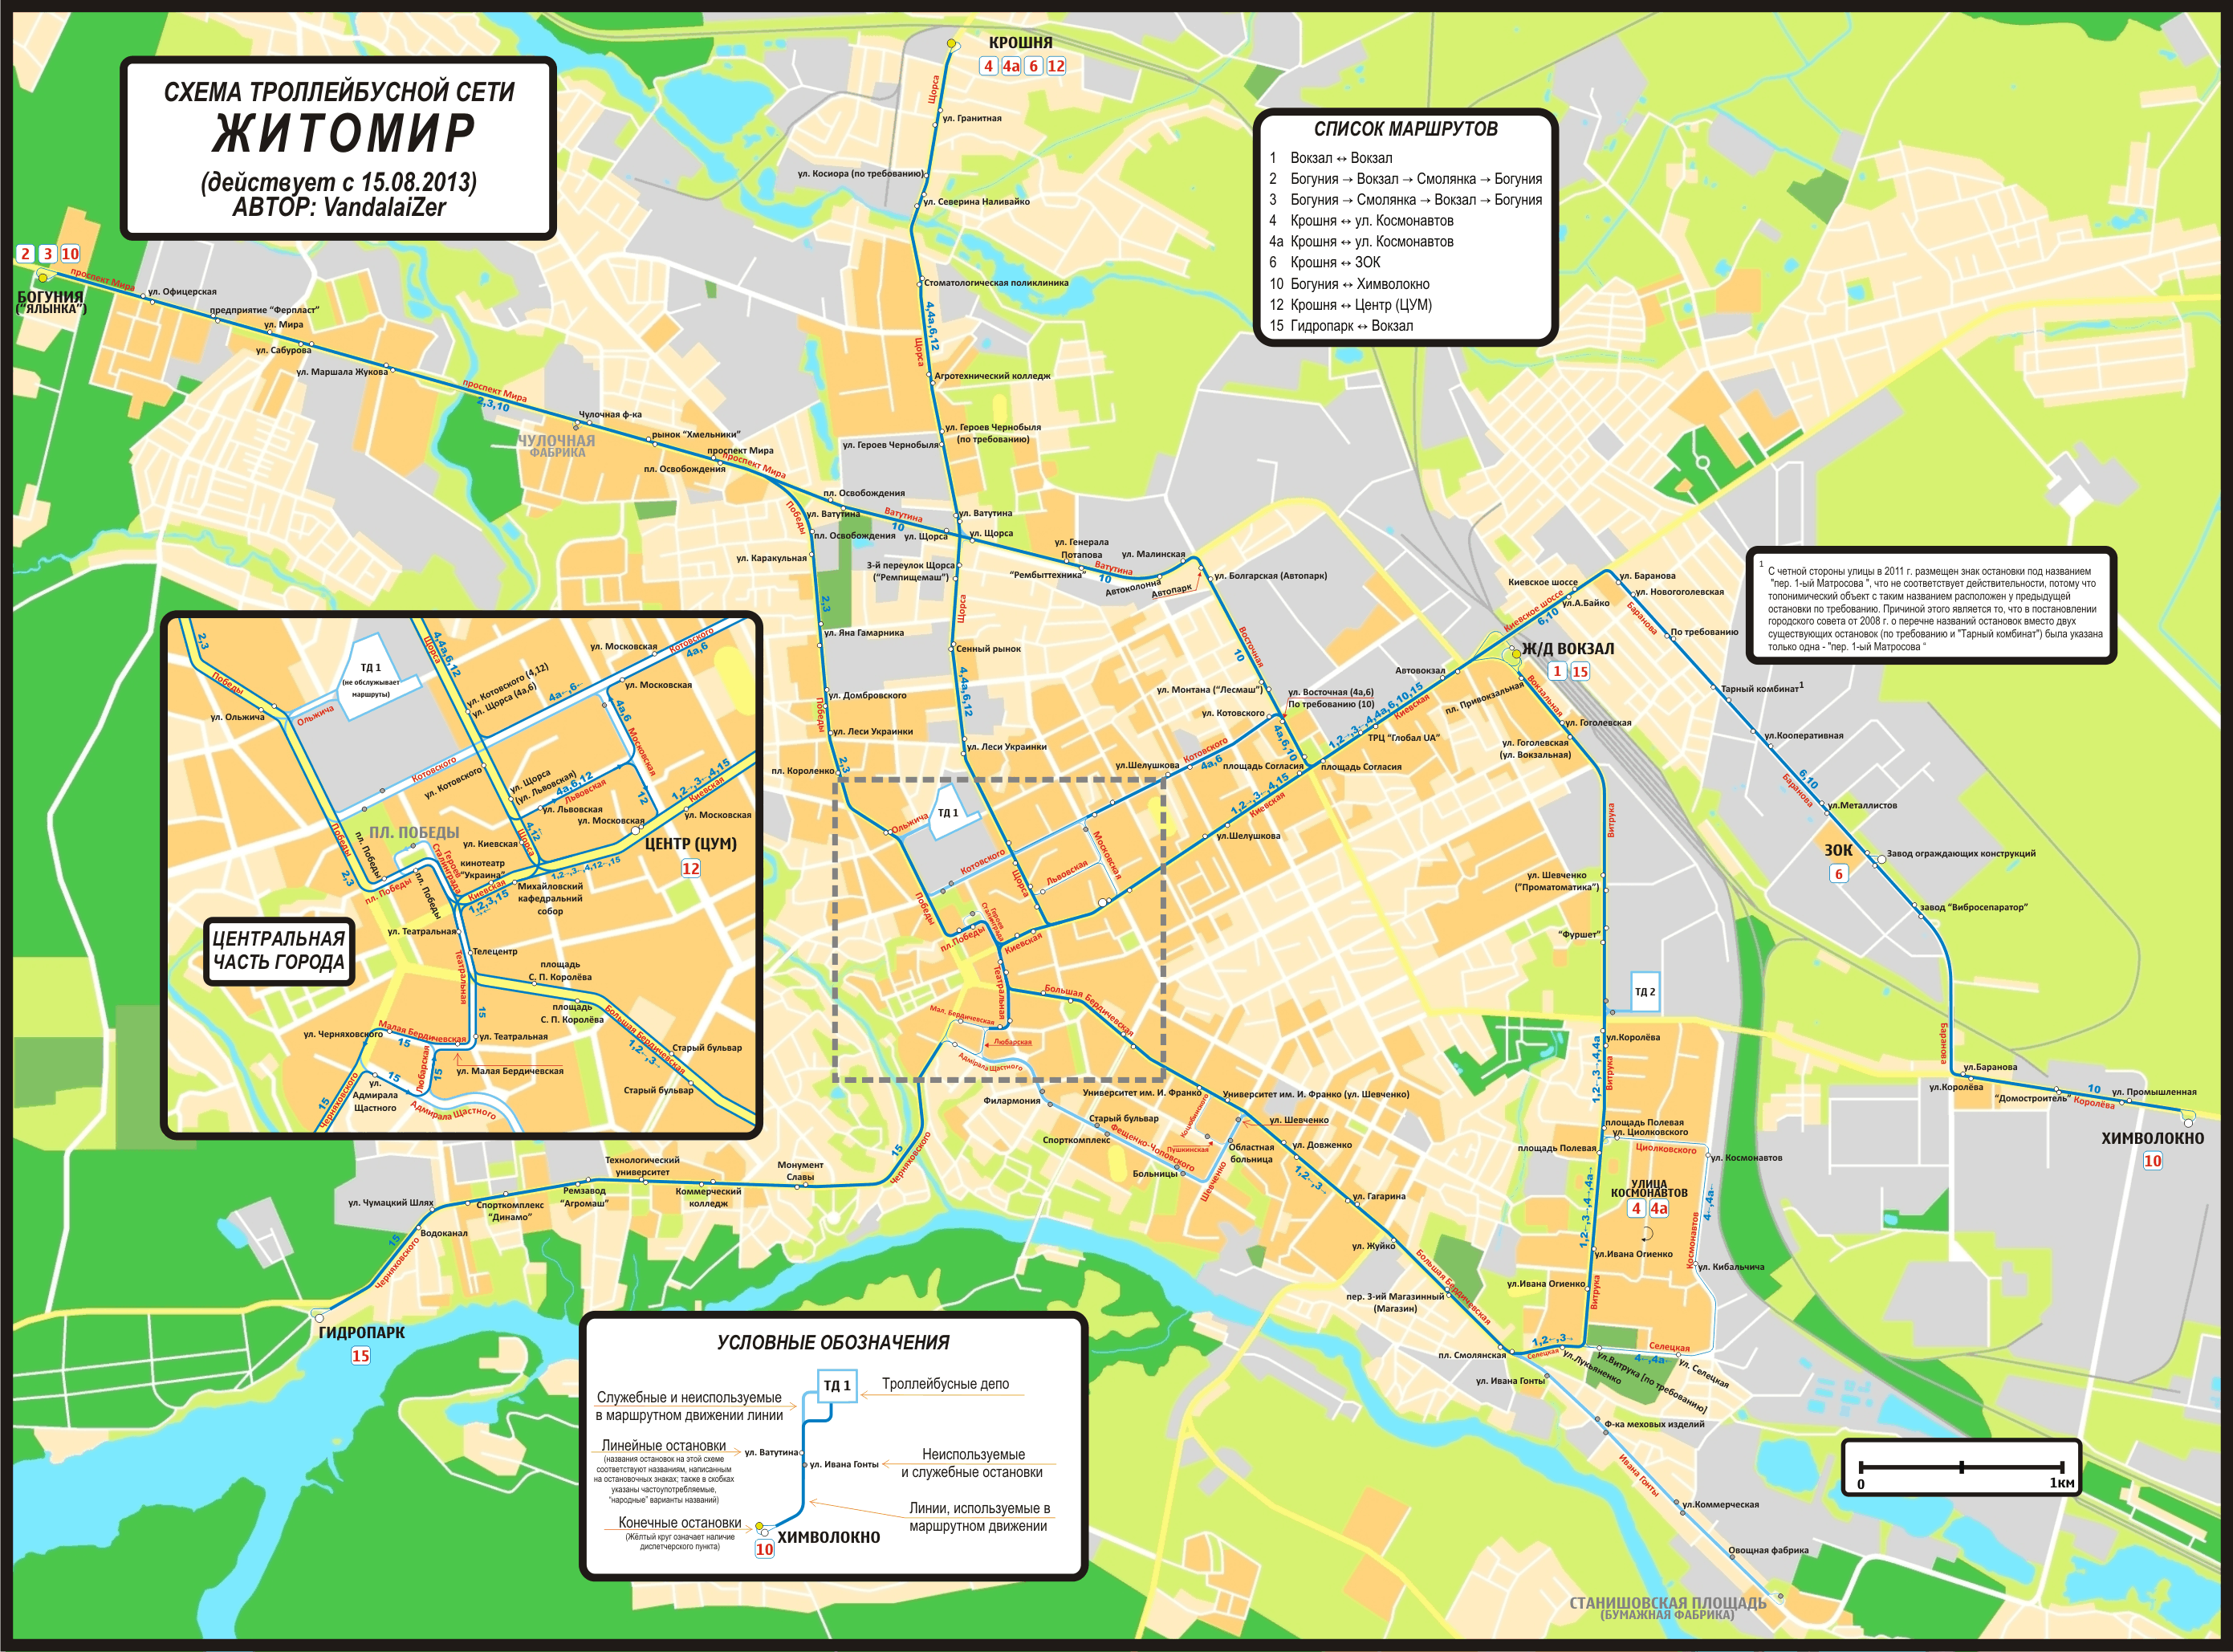 Žytomyras — Tram (since 1975) and trolleybus routes